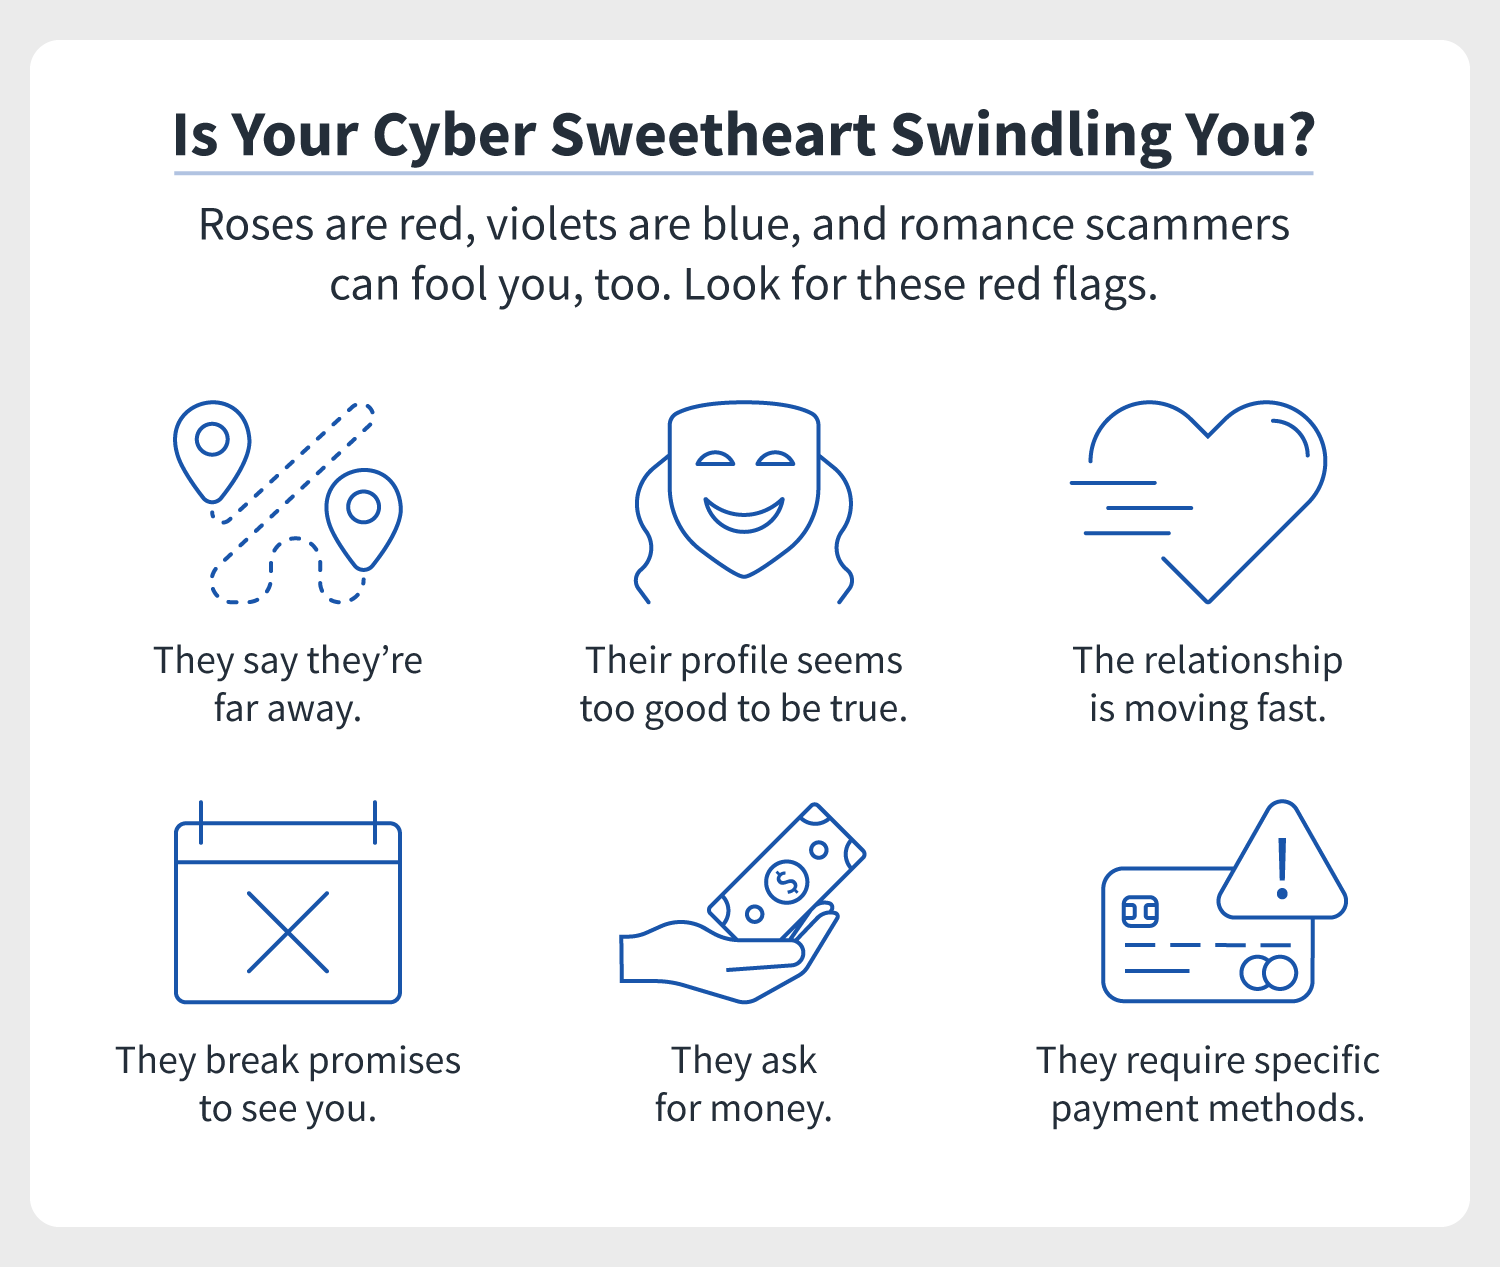 Pictures of romance scammers